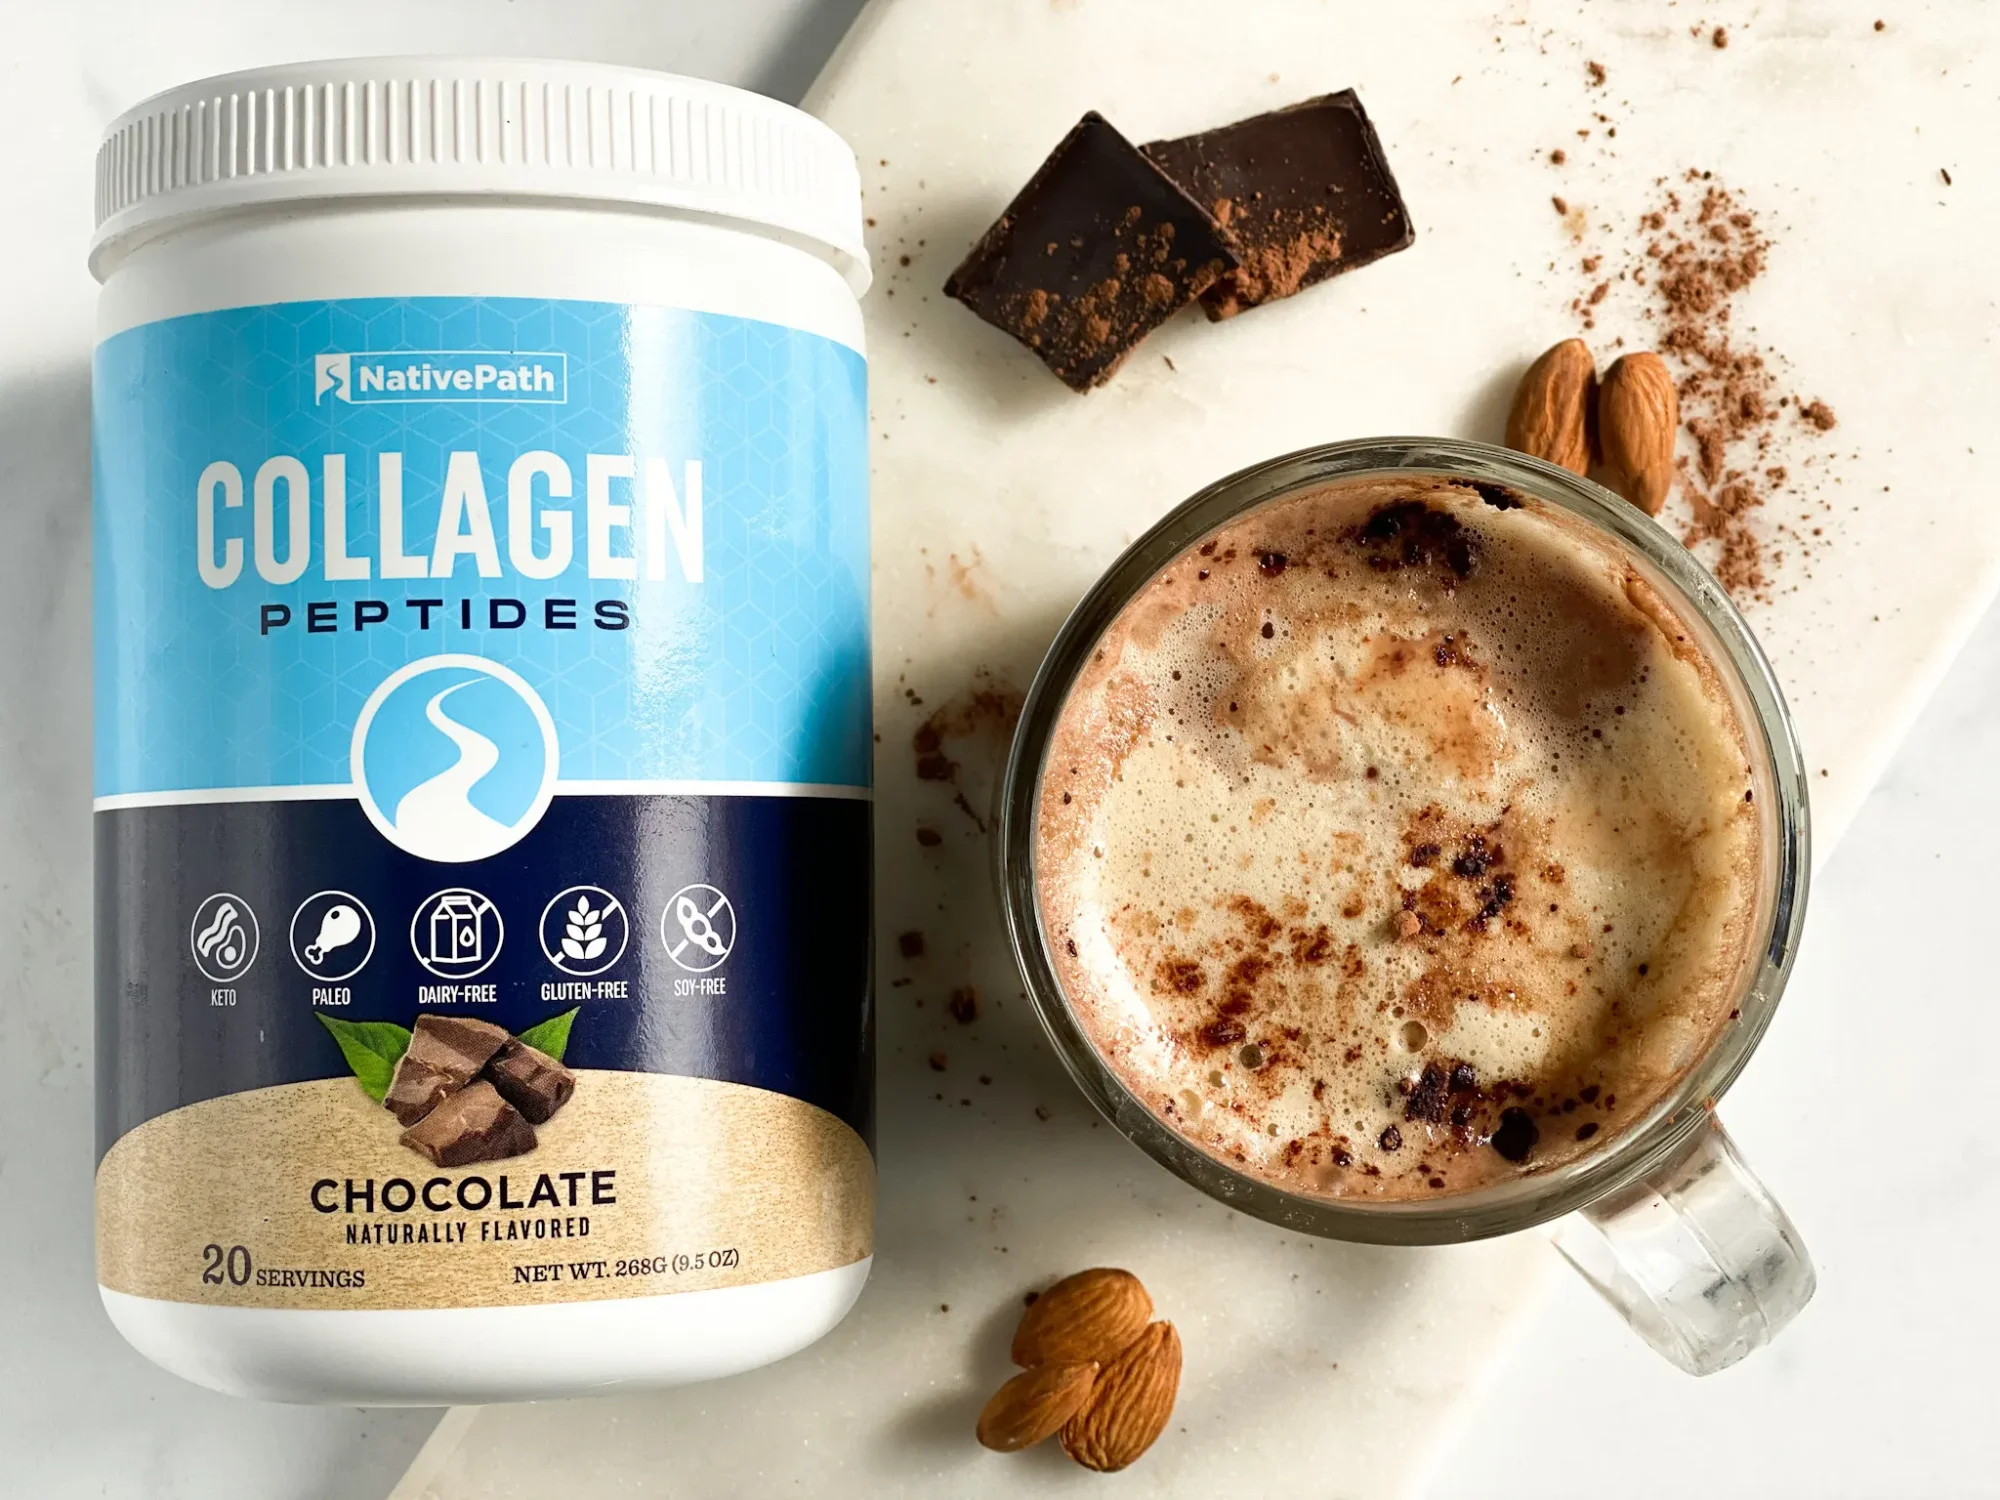 Top of view image showcasing a steaming mug of healthy hot chocolate with a jar of Chocolate Collagen. Almond, cocoa, and dark chocolate are sprinkled around the mug.